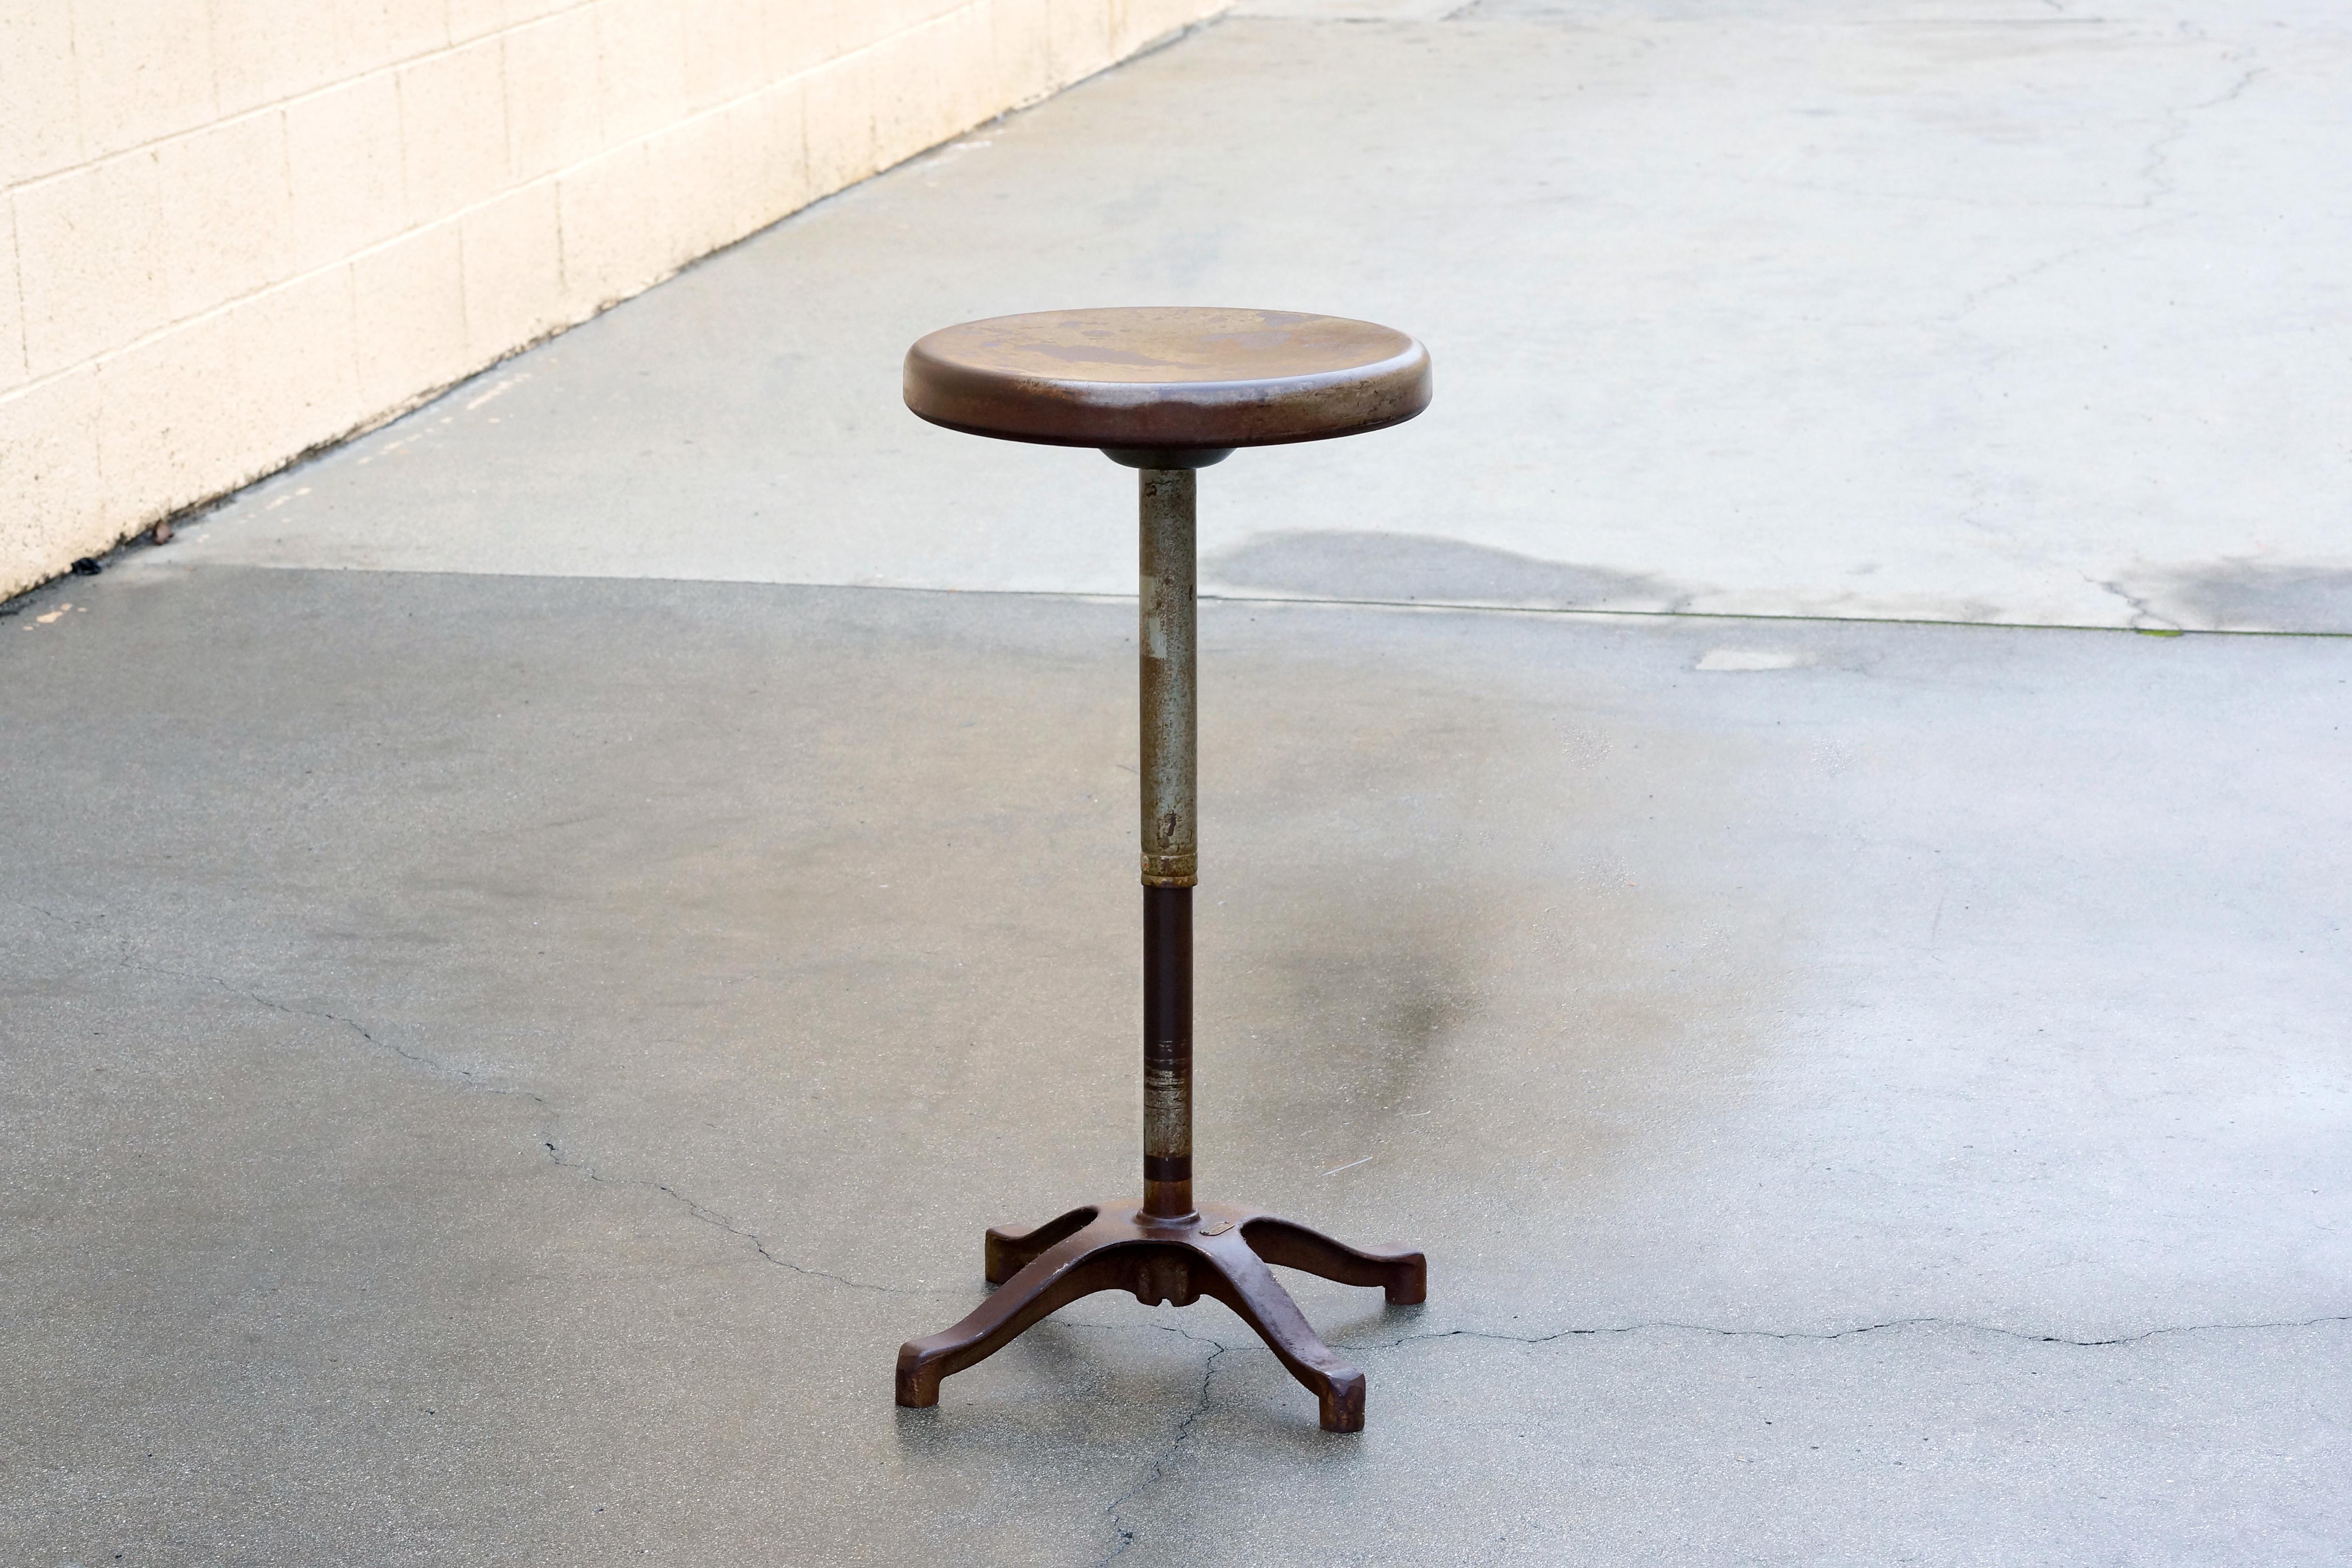 Antique steel stool ideal for use as a music stool or drafting stool. All steel with a wonderful distressed patina, lightly clear-coated to maintain variation in finish. 

Dimensions: 13